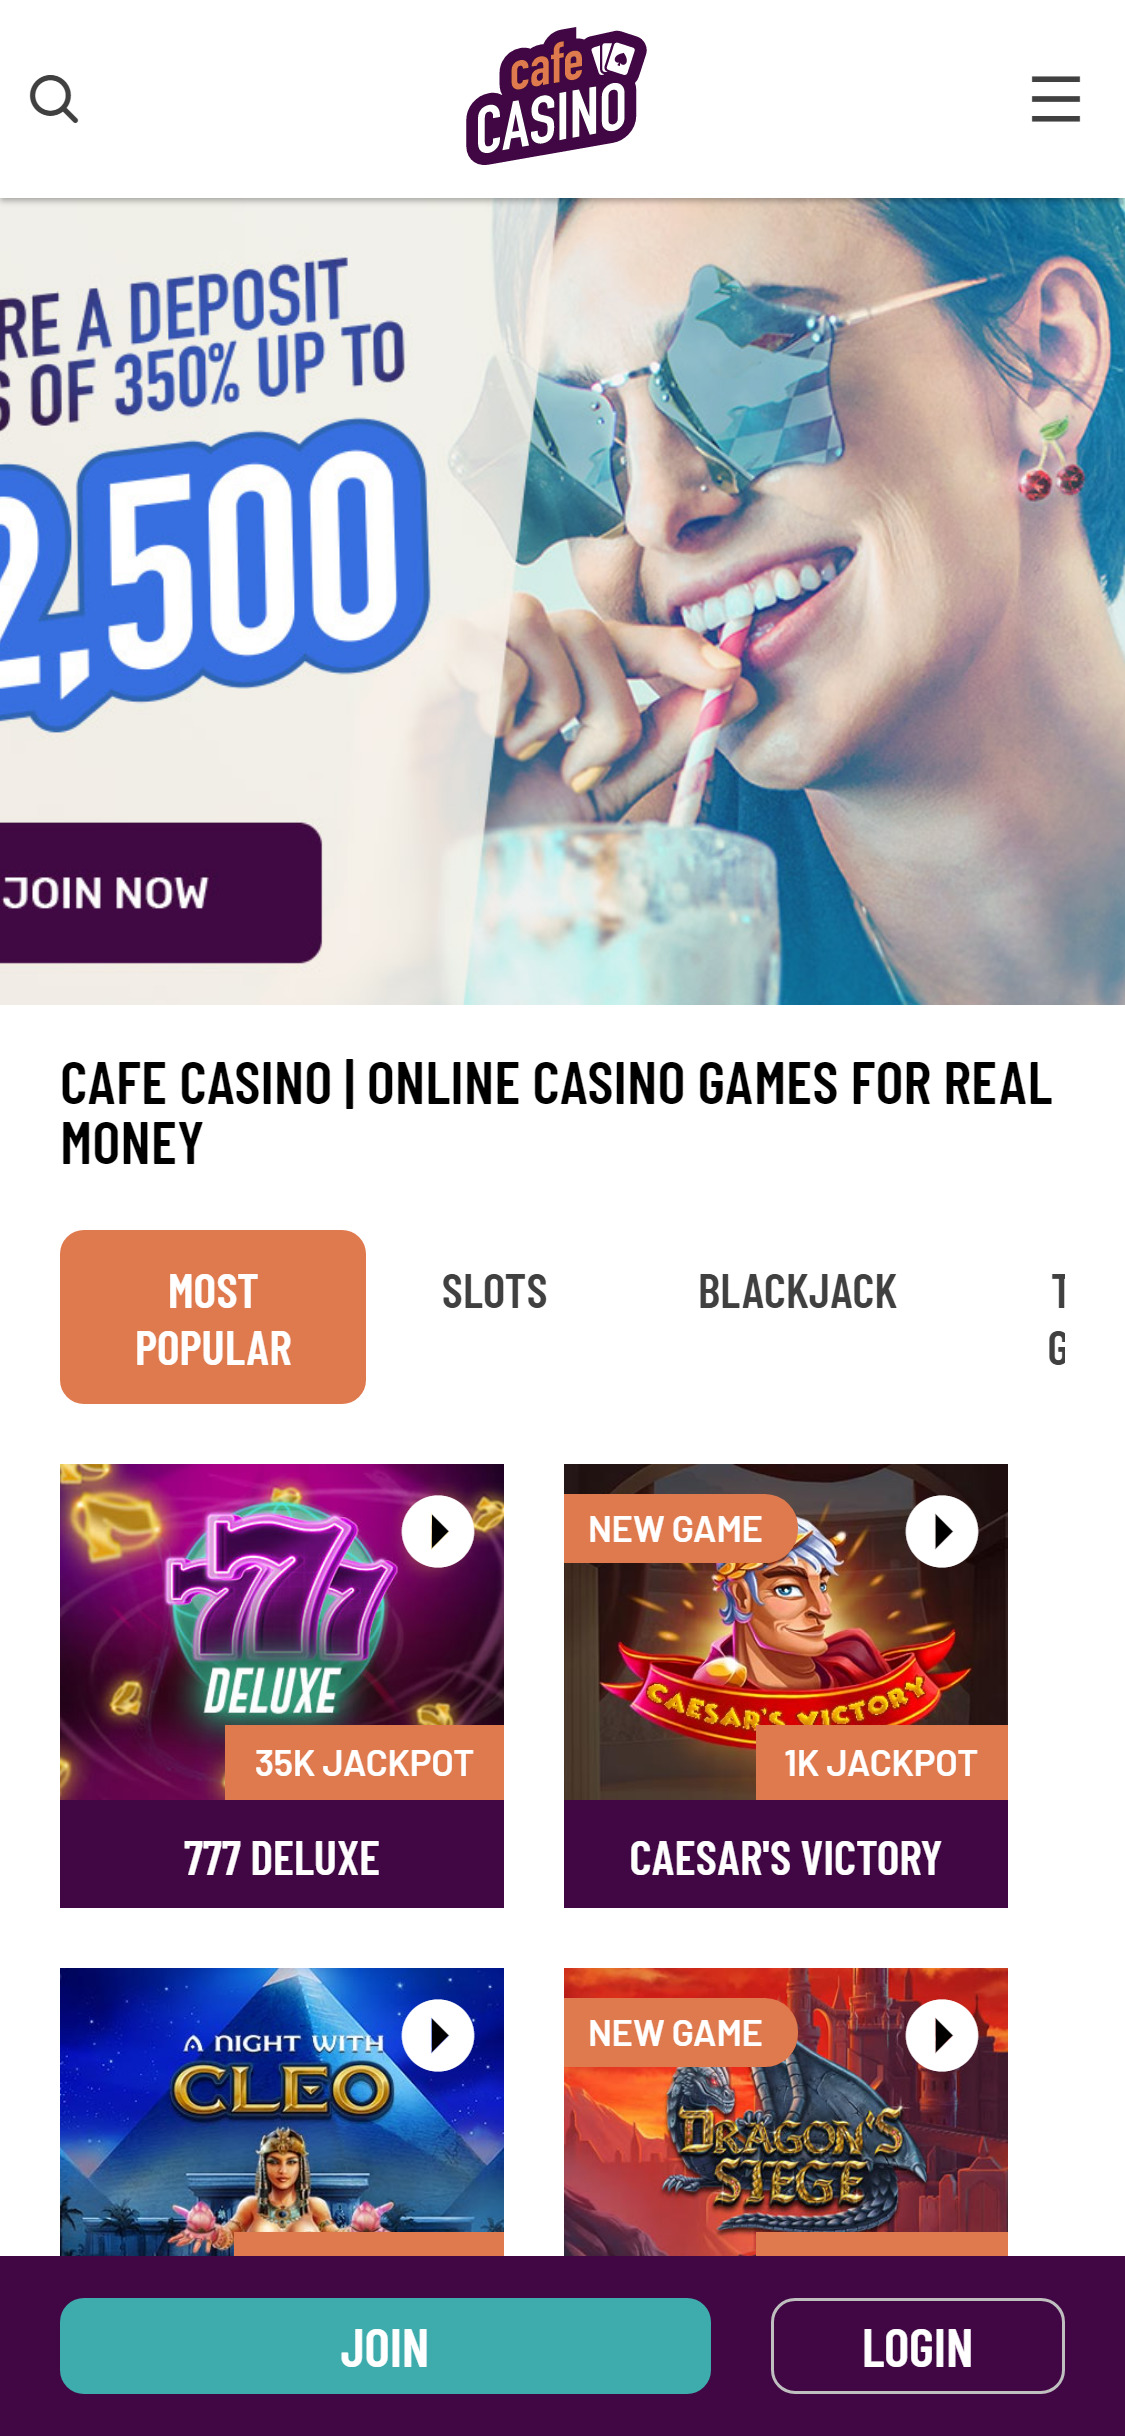 Cafe Casino Mobile Login Review